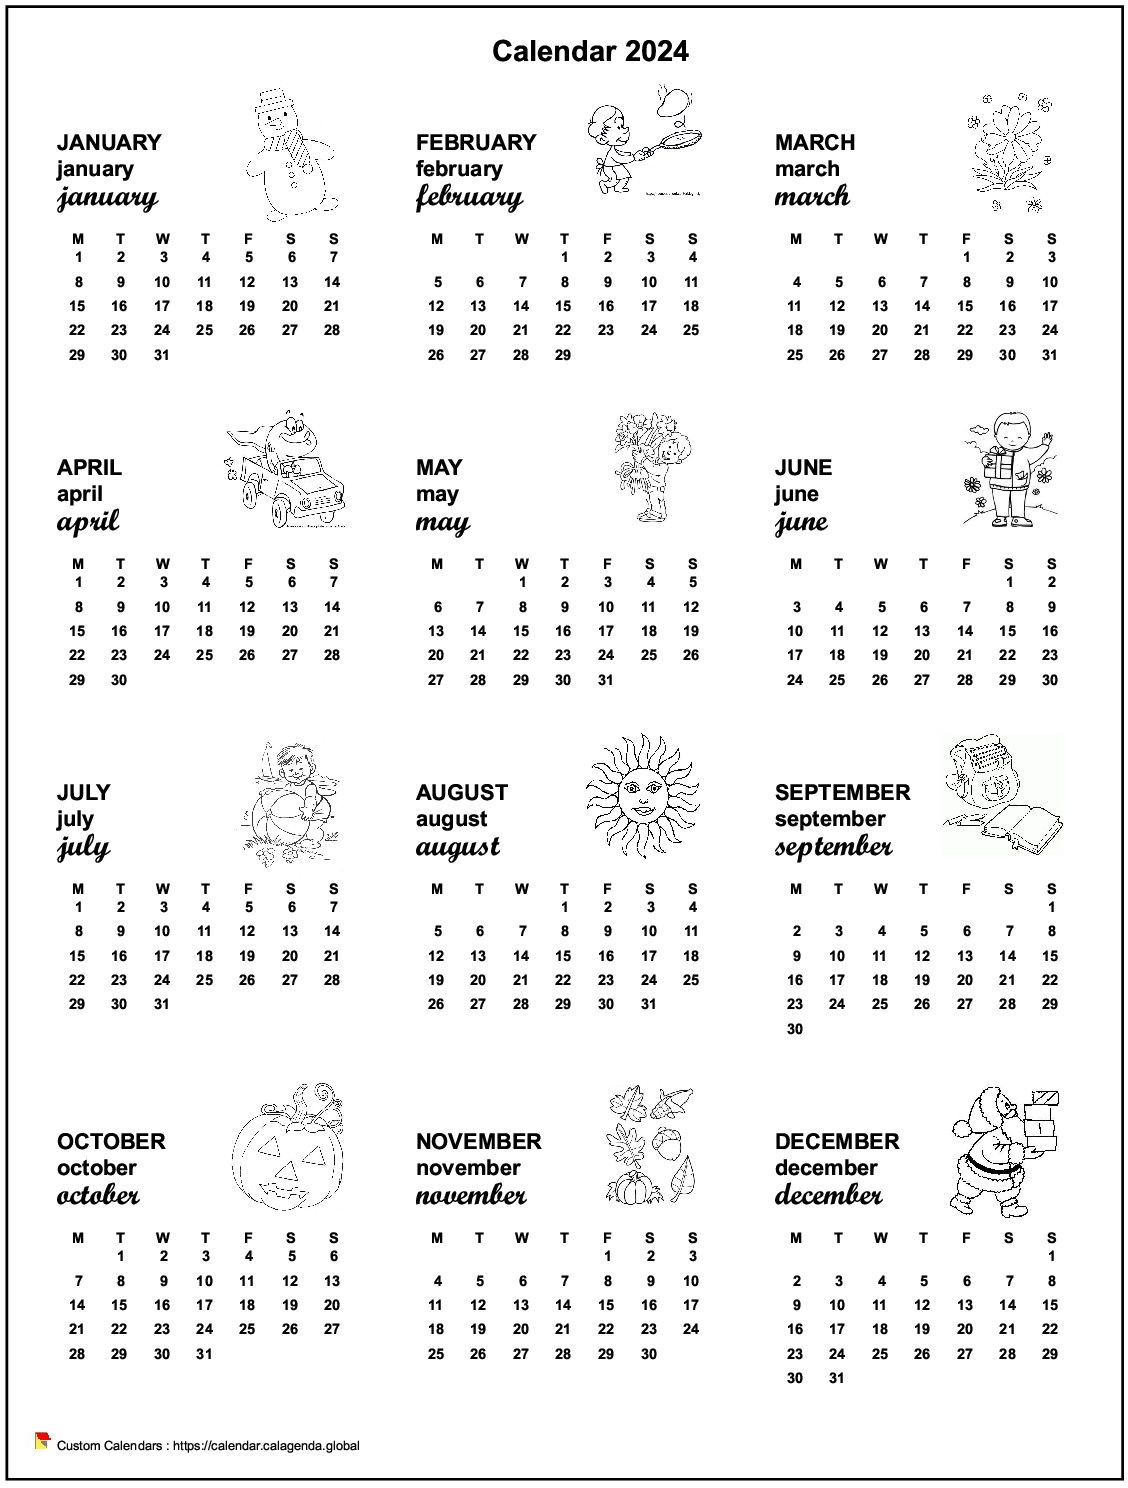 Calendar 2044 annual maternal and primary school